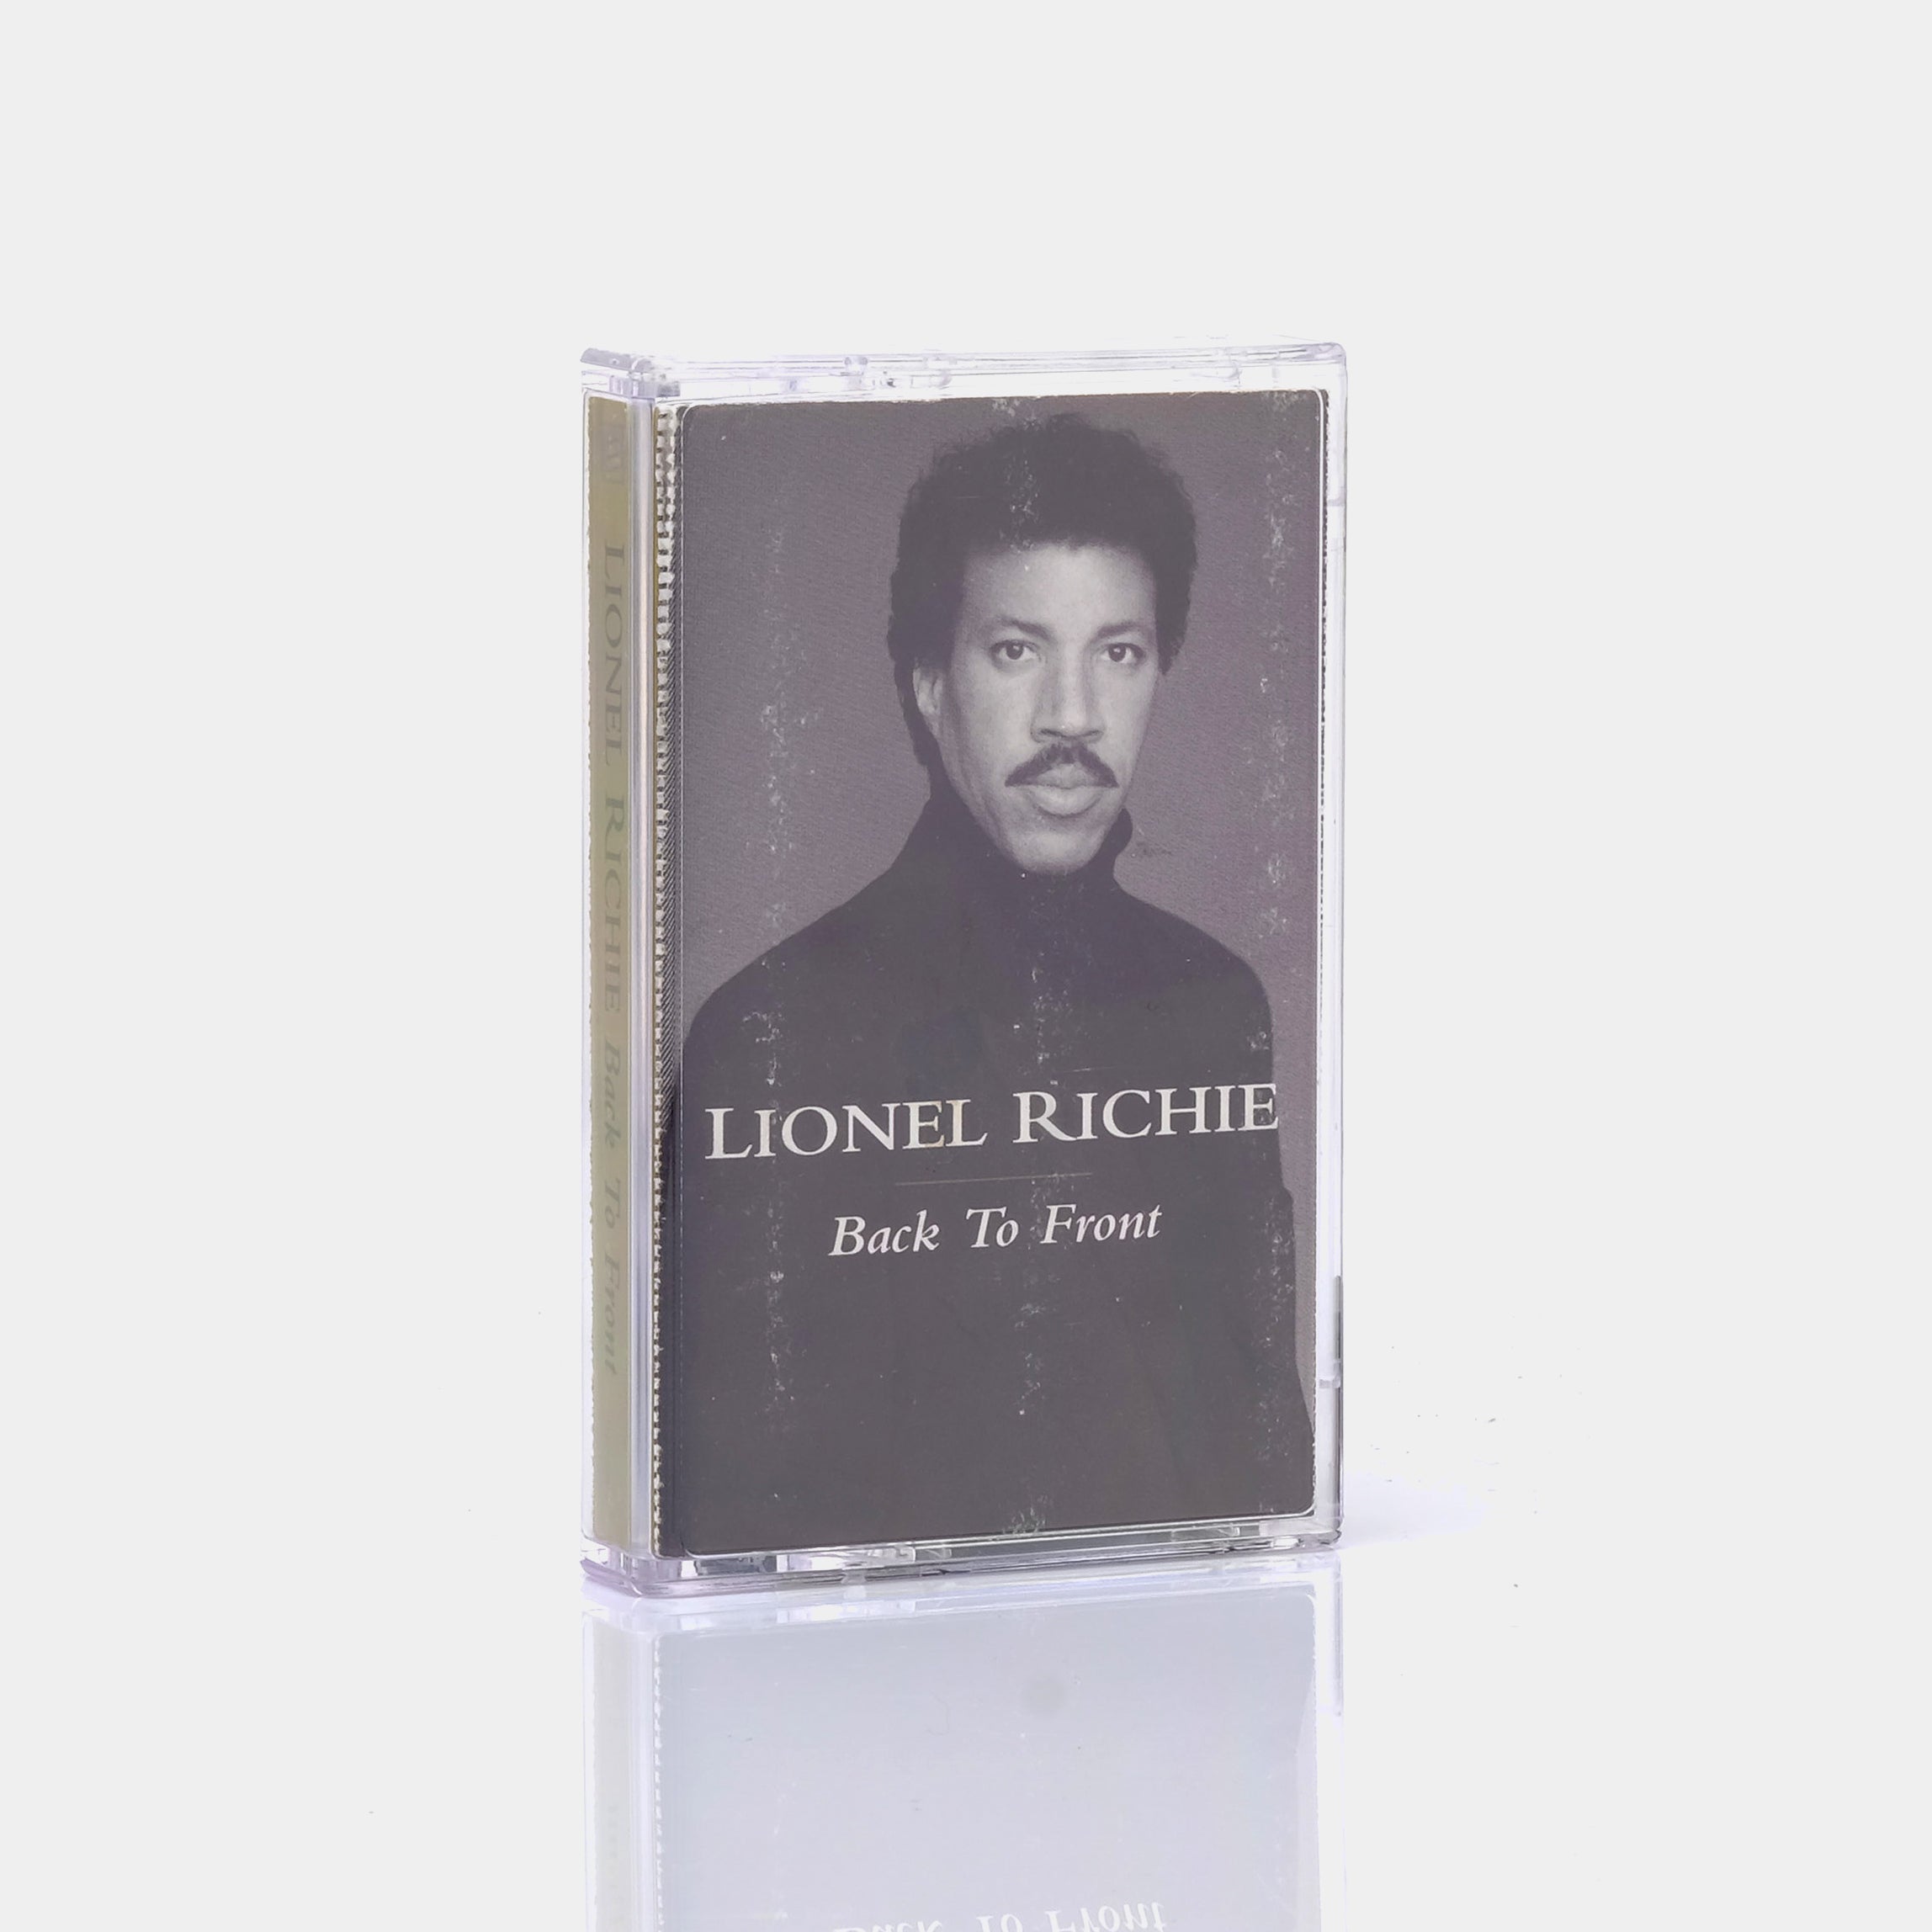 Lionel Richie - Back To Front Cassette Tape